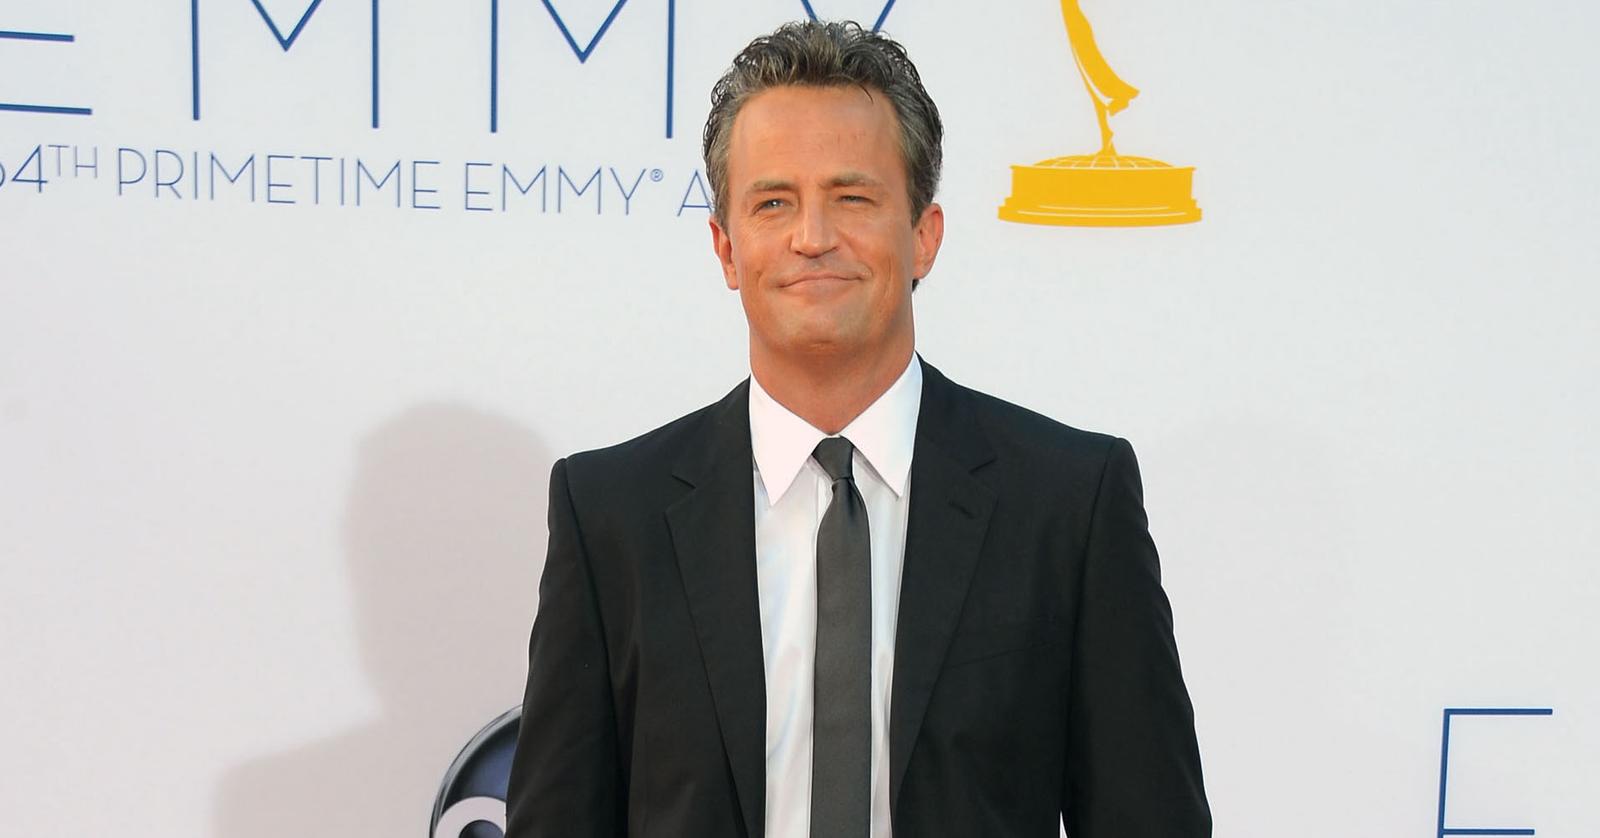 Did Matthew Perry Have a Stroke? ‘Friends’ Fans Are Speculating